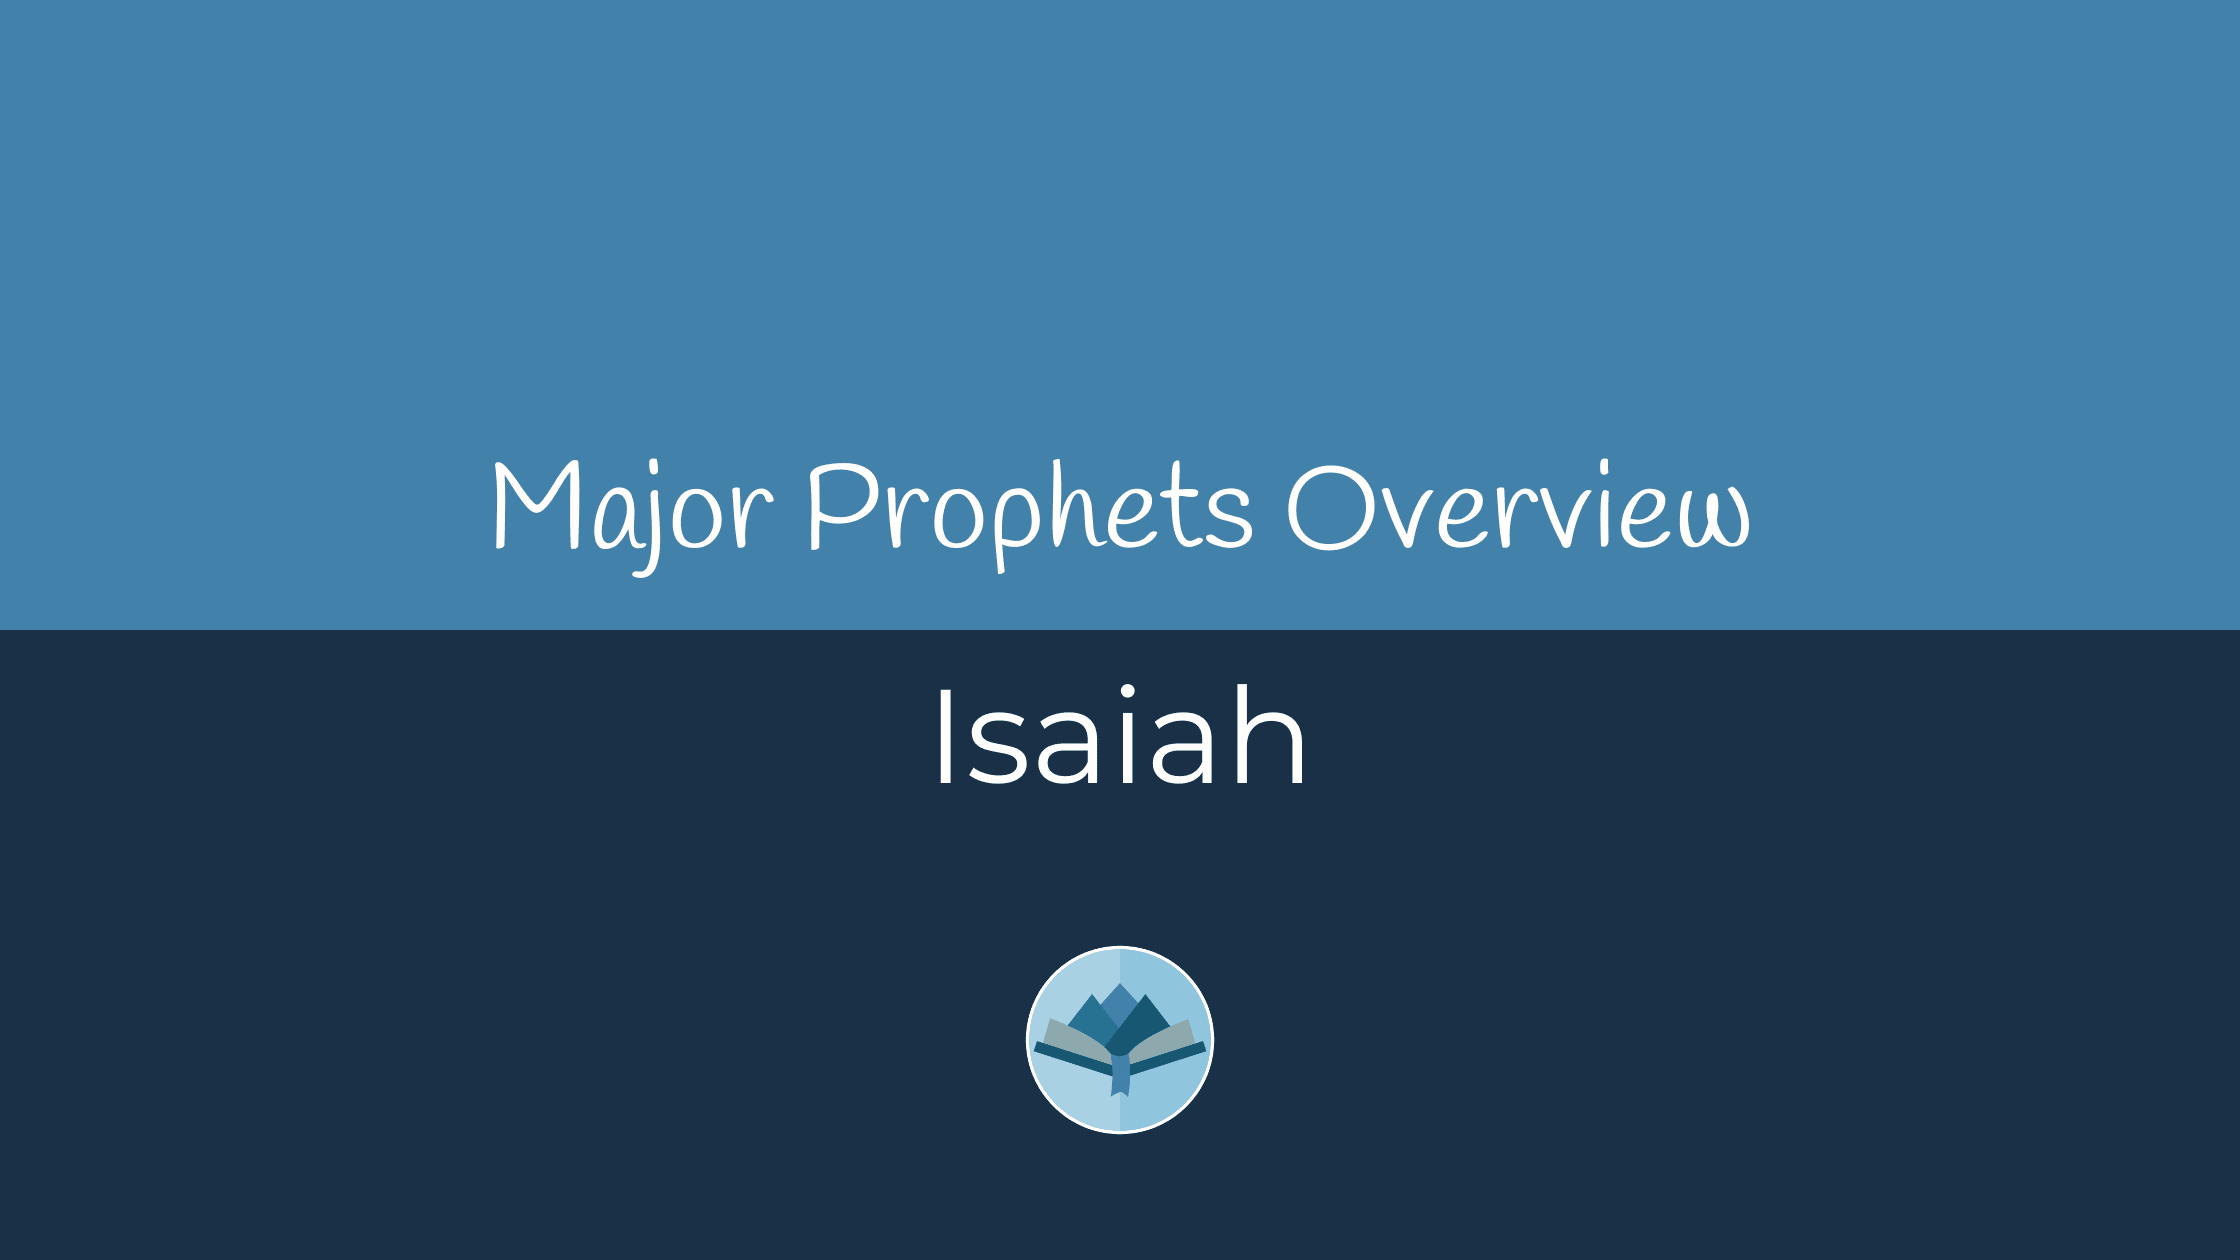 Book of Isaiah Overview